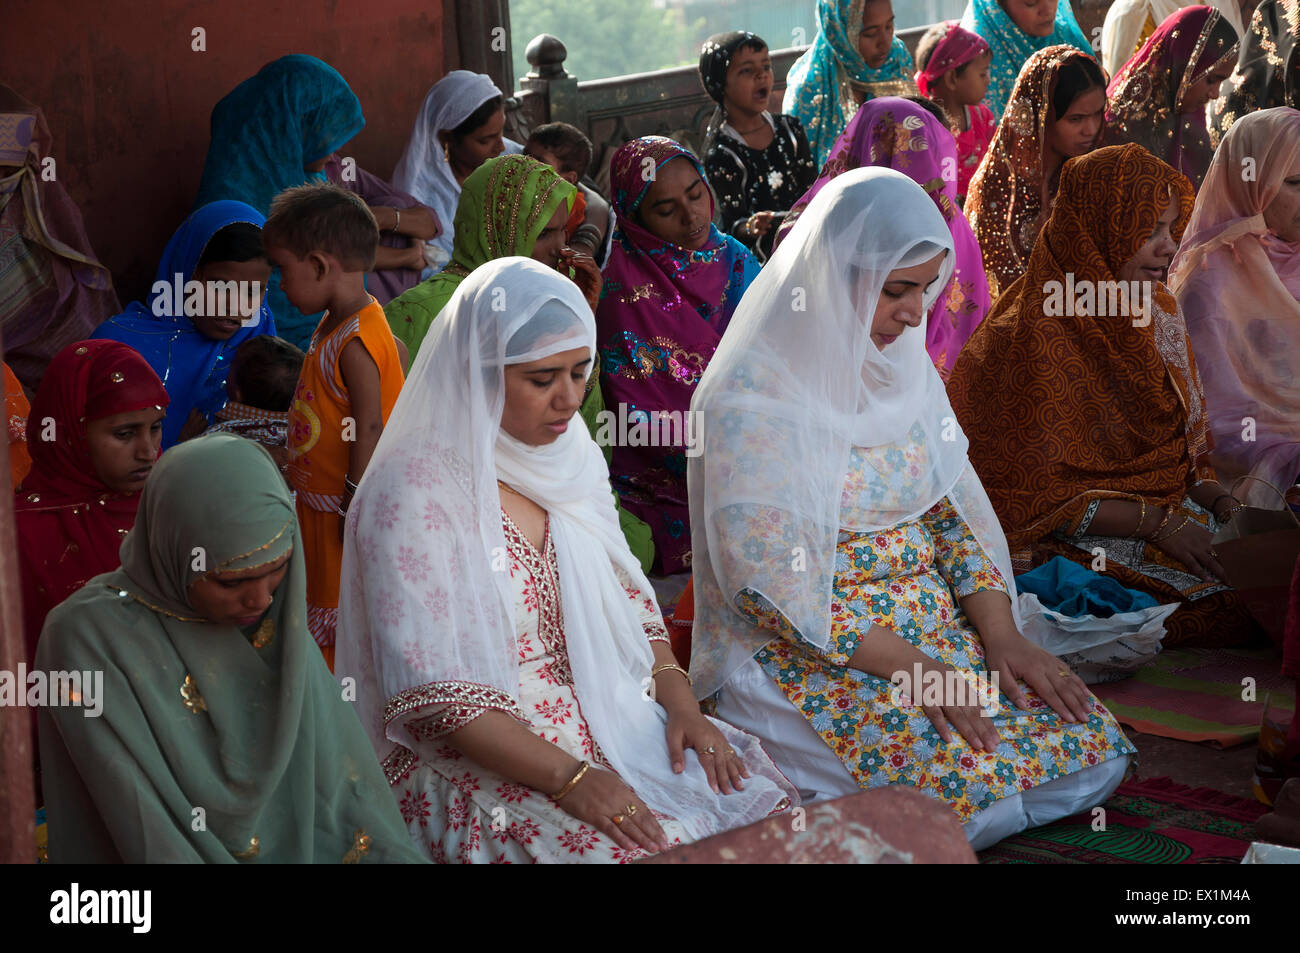 Women praying during the festival of Eid-ul-fitr at the Jama Masjid mosque in old Delhi, India. Stock Photo